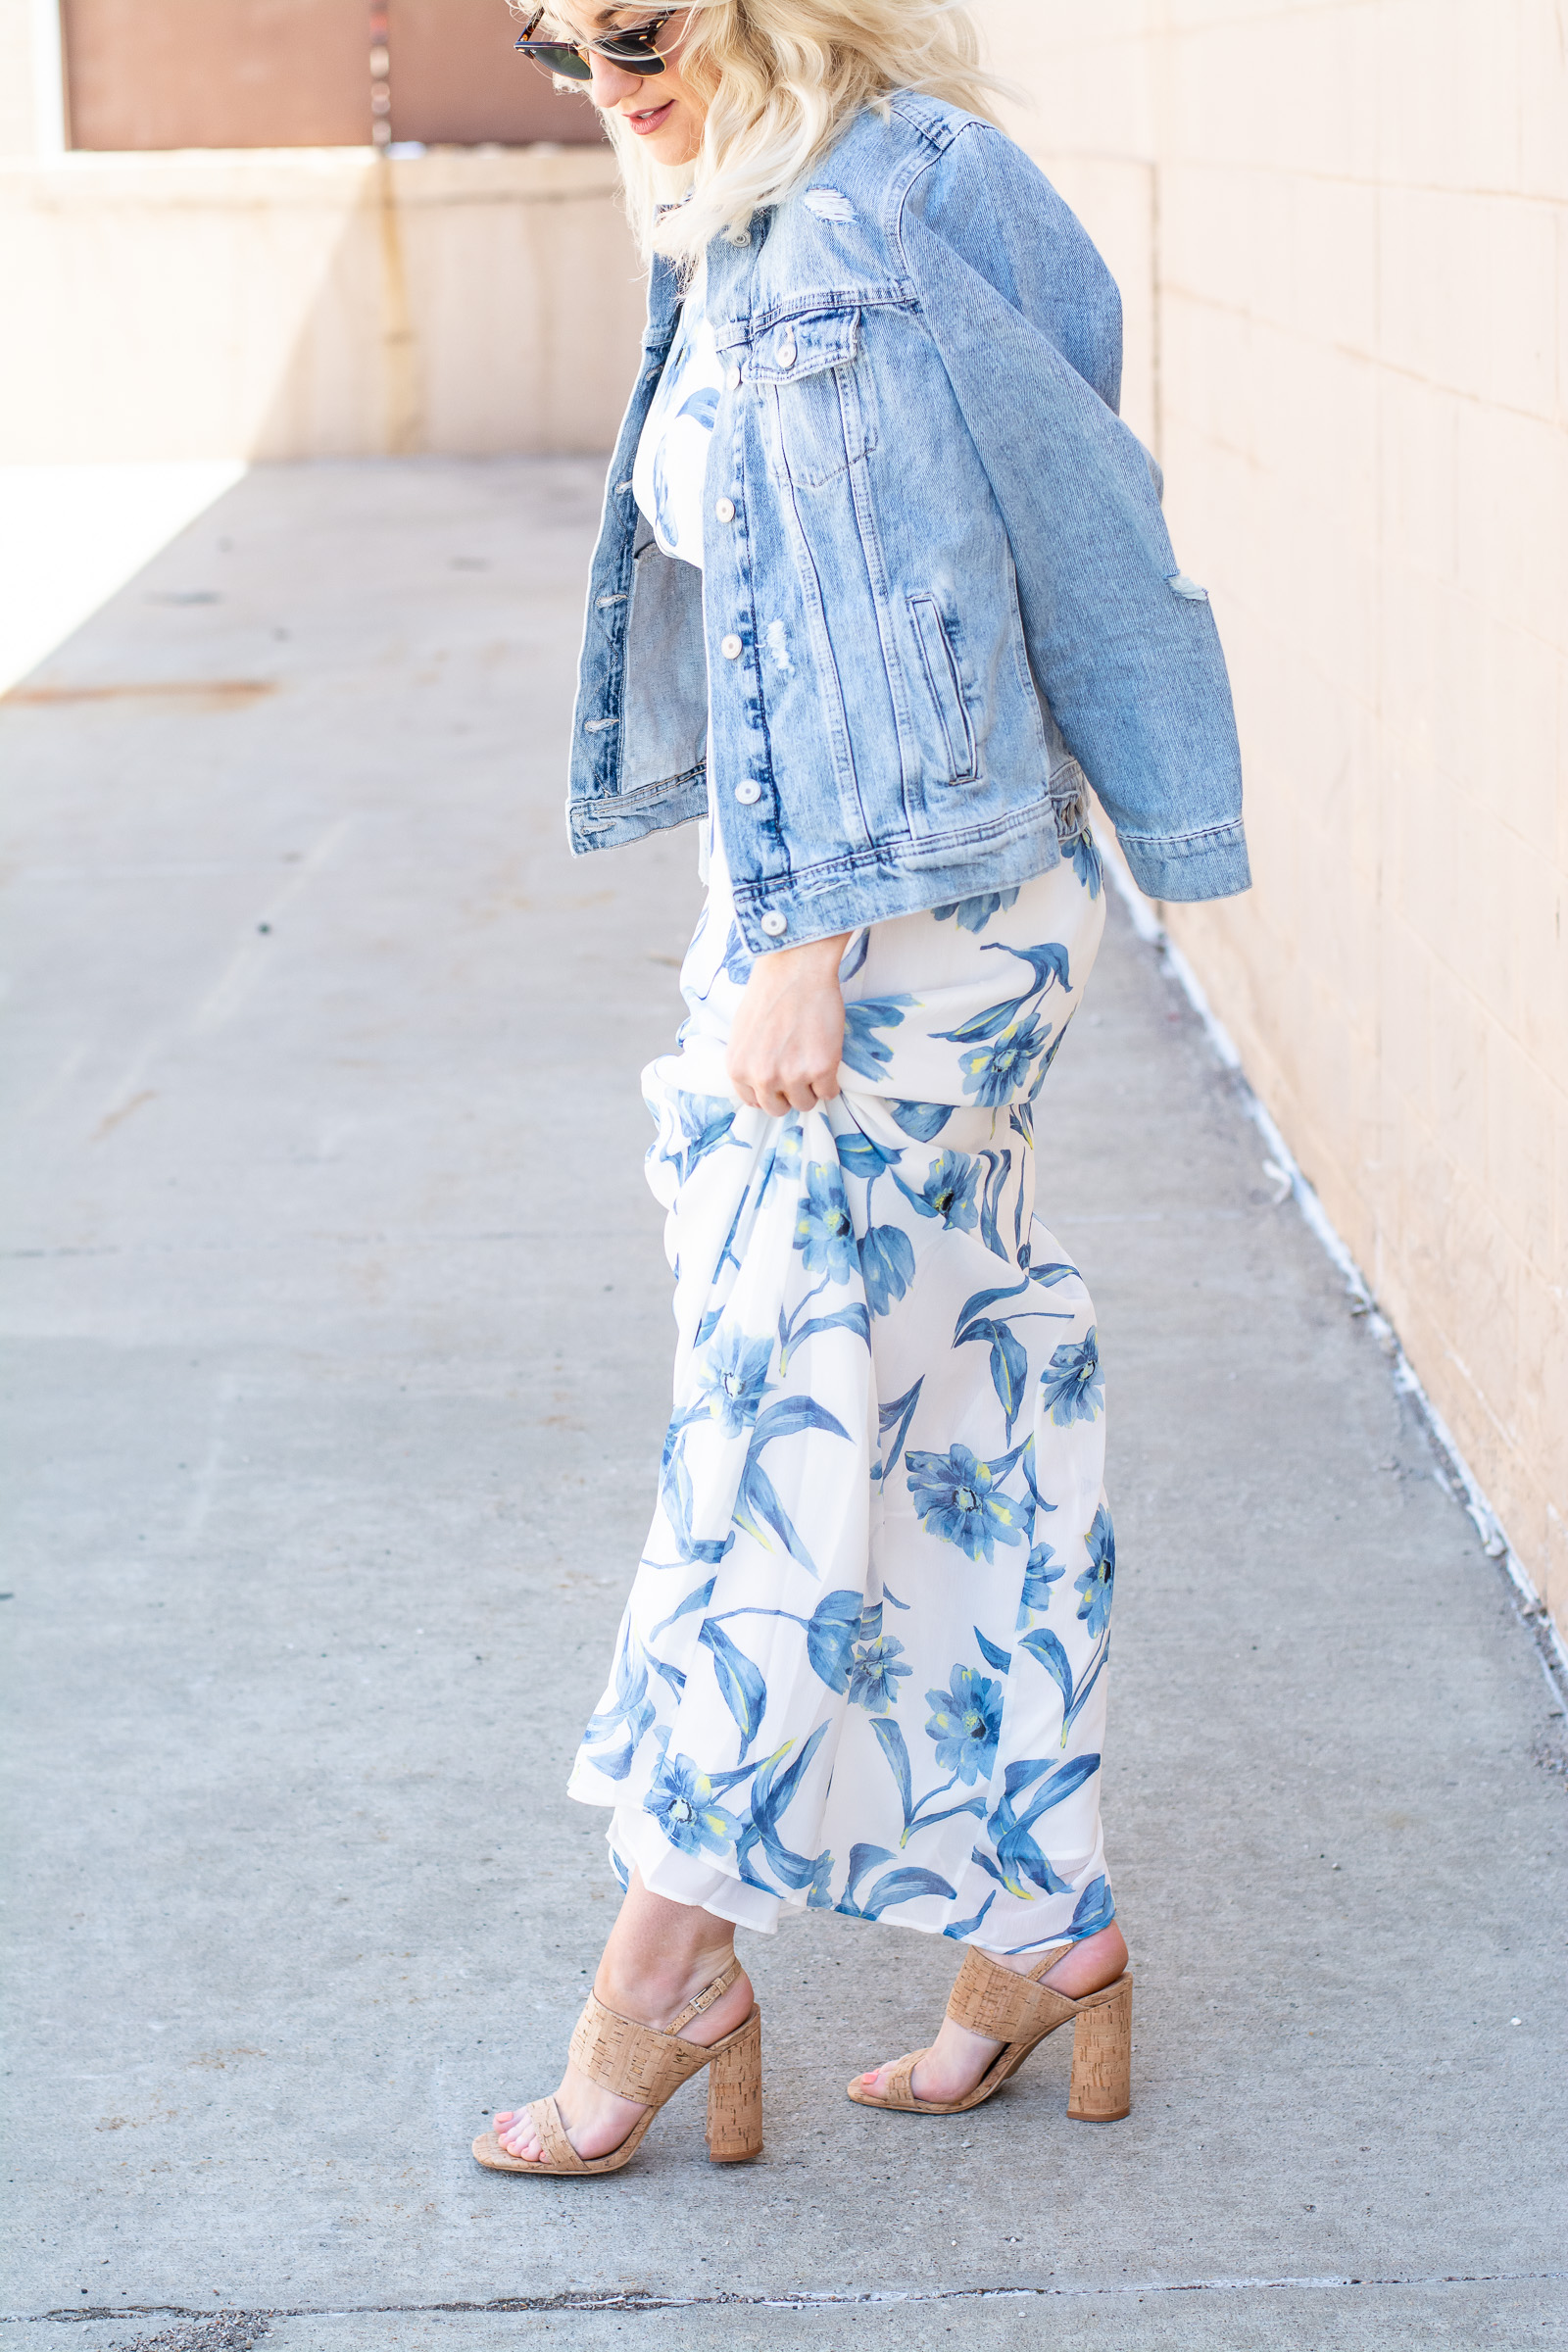 A Denim Jacket with a Floral Dress. | Ash from LSR